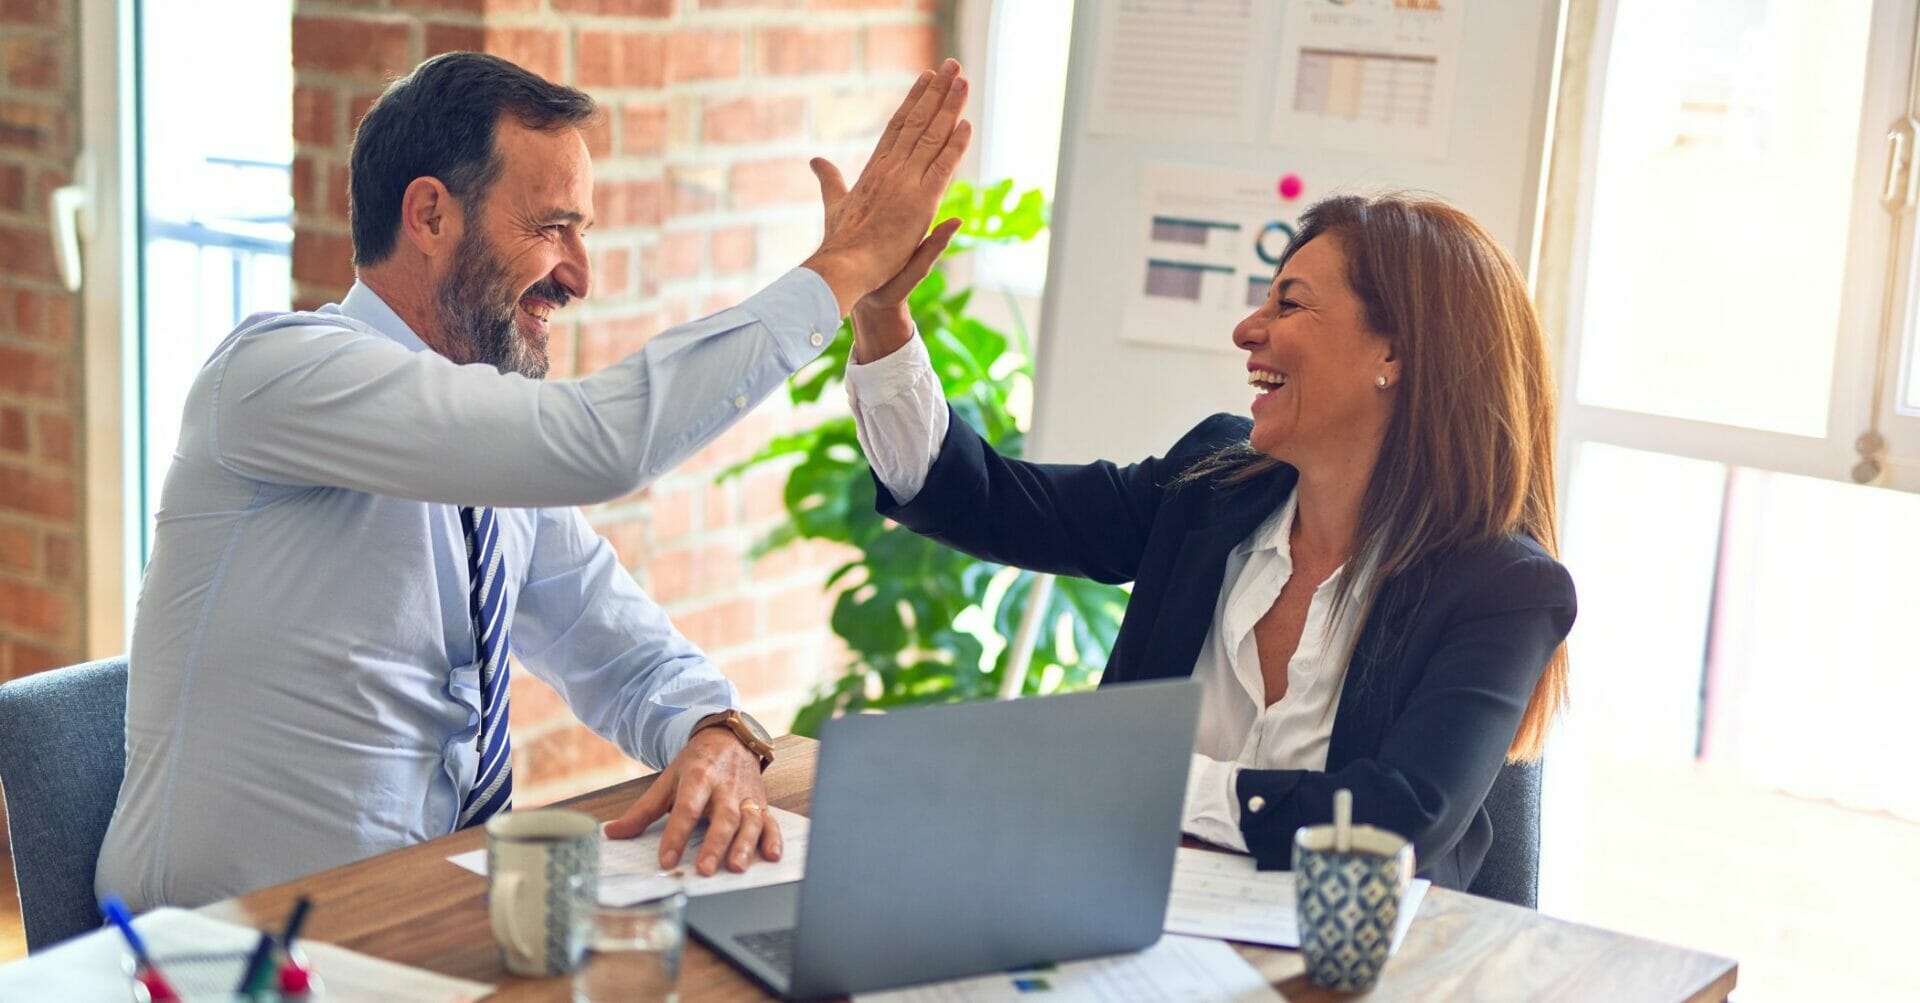 Colleagues high-fiving - How to Be More Positive